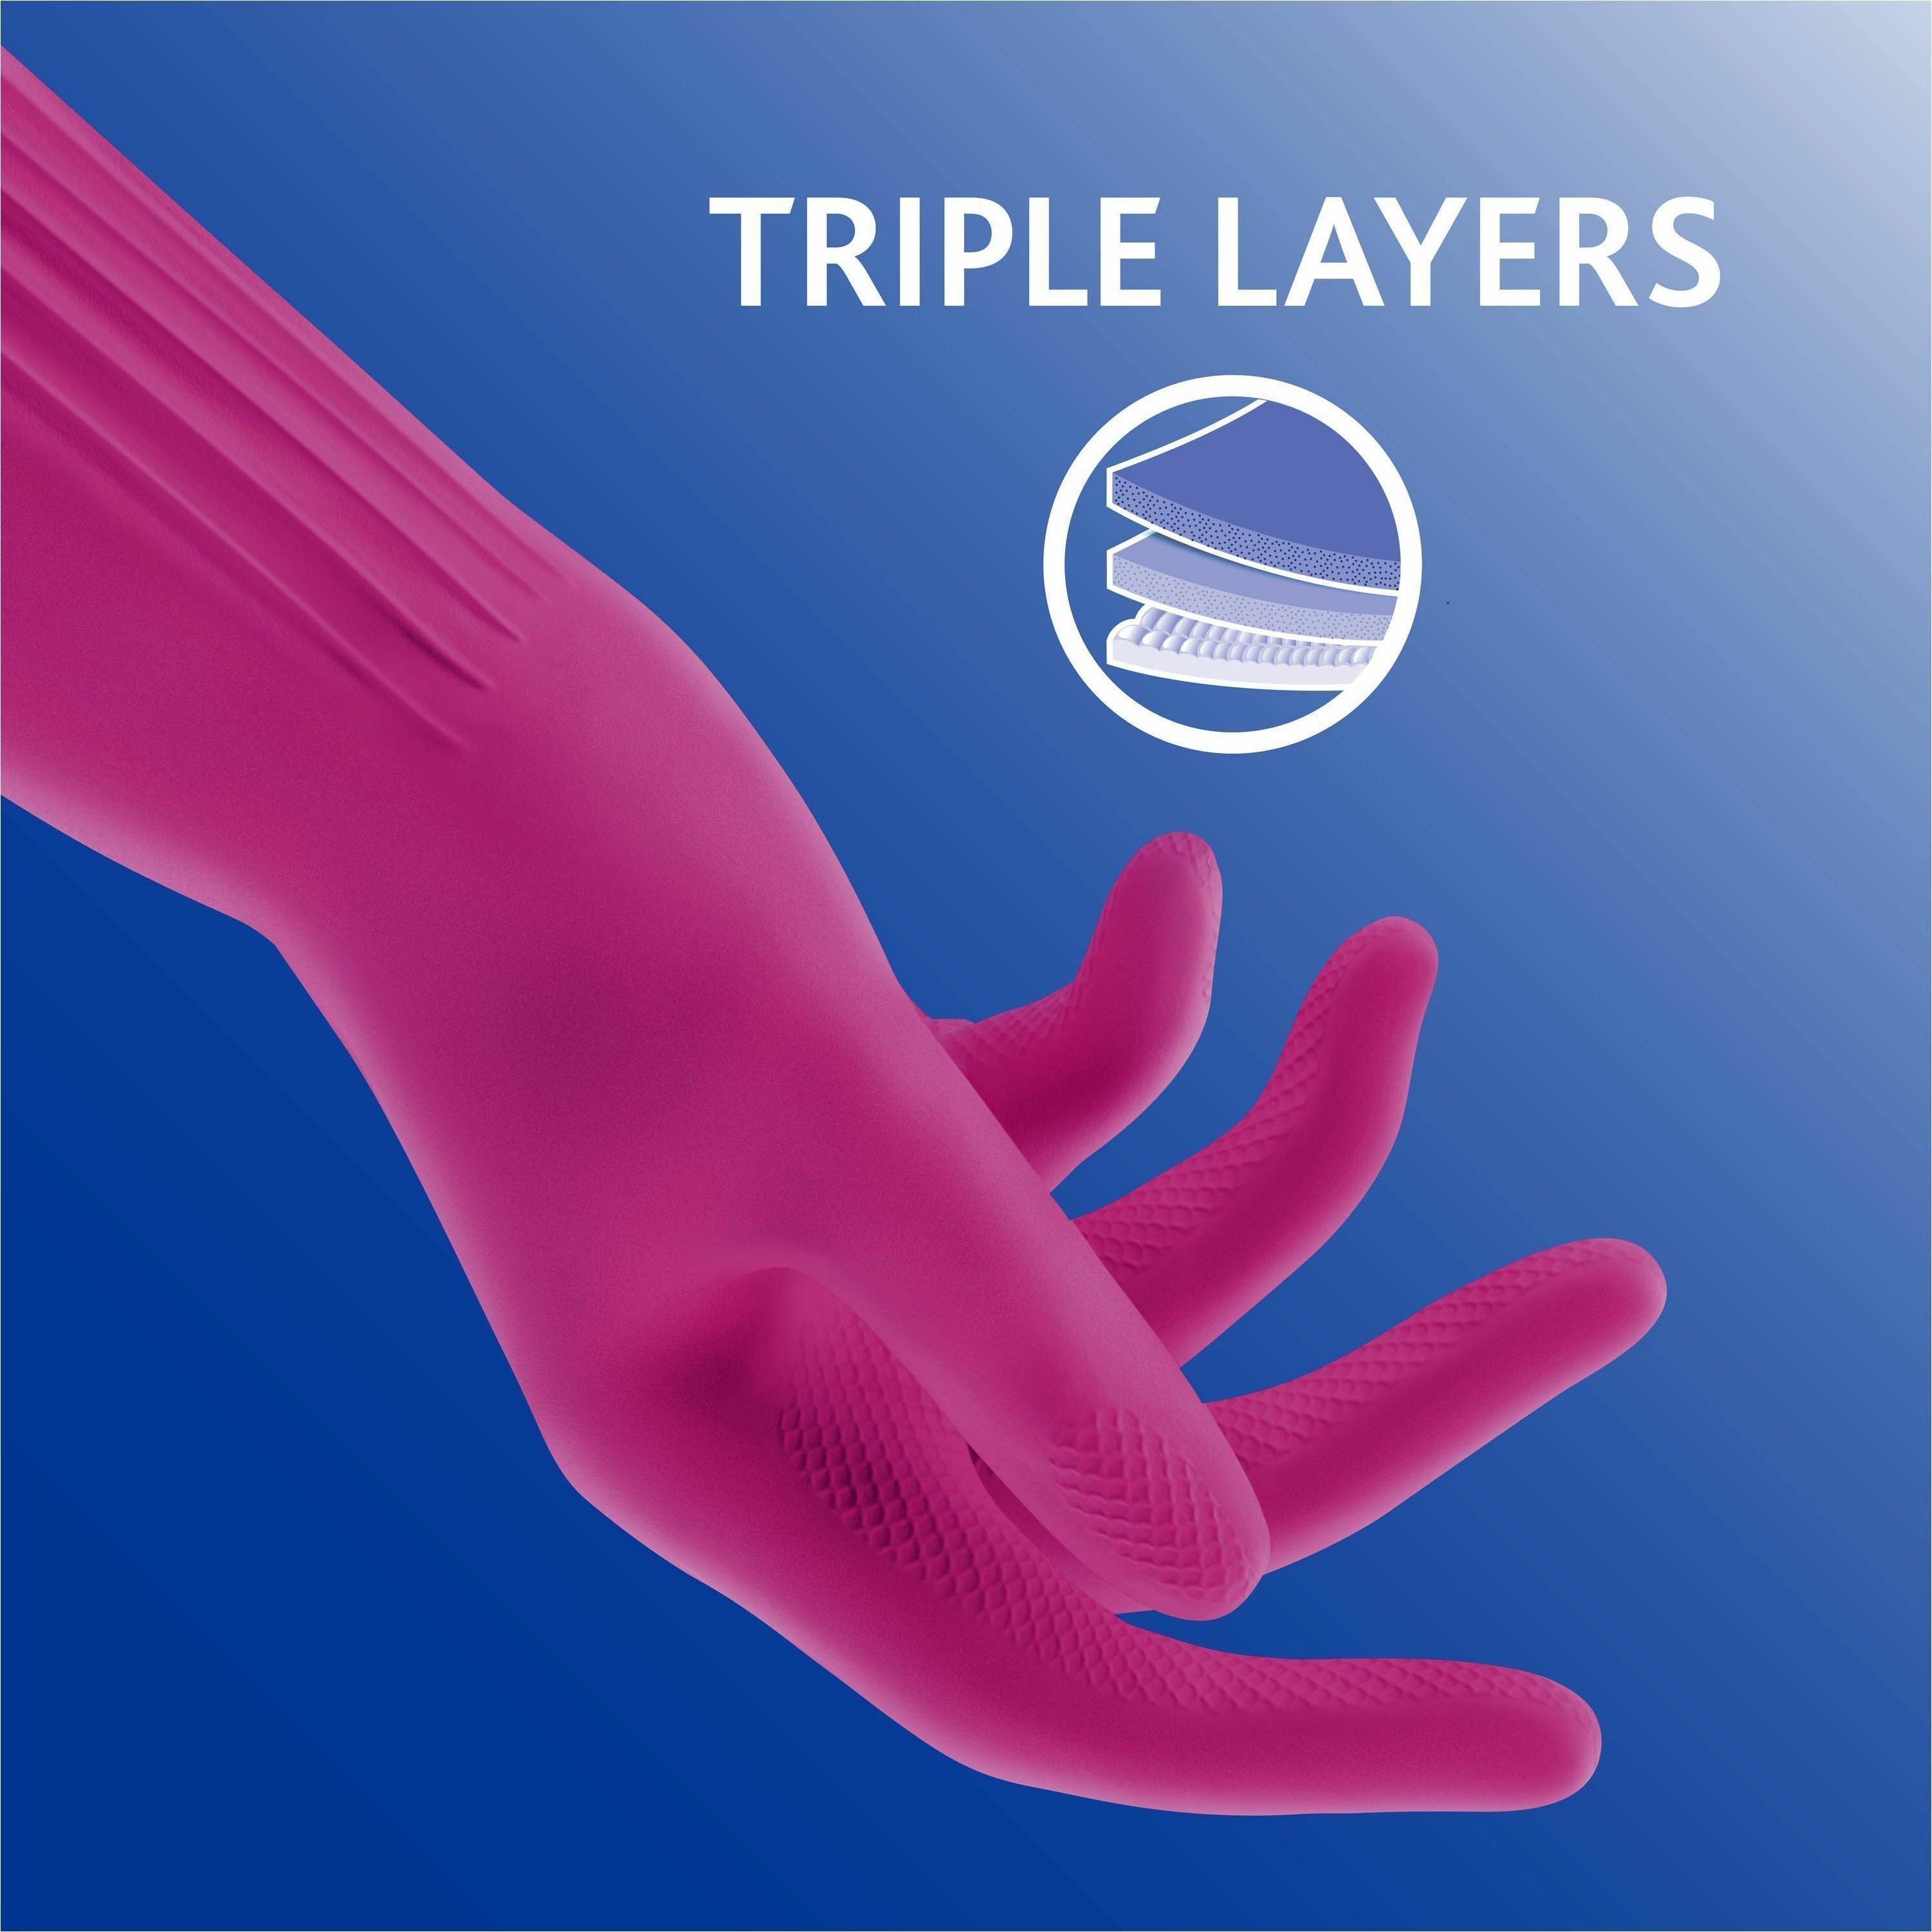 o-cedar-playtex-living-gloves-chemical-bacteria-protection-large-size-latex-neoprene-nitrile-pink-anti-microbial-reusable-durable-comfortable-odor-resistant-textured-palm-textured-fingertip-for-household-cleaning-2-pair-14_fhp166120 - 4